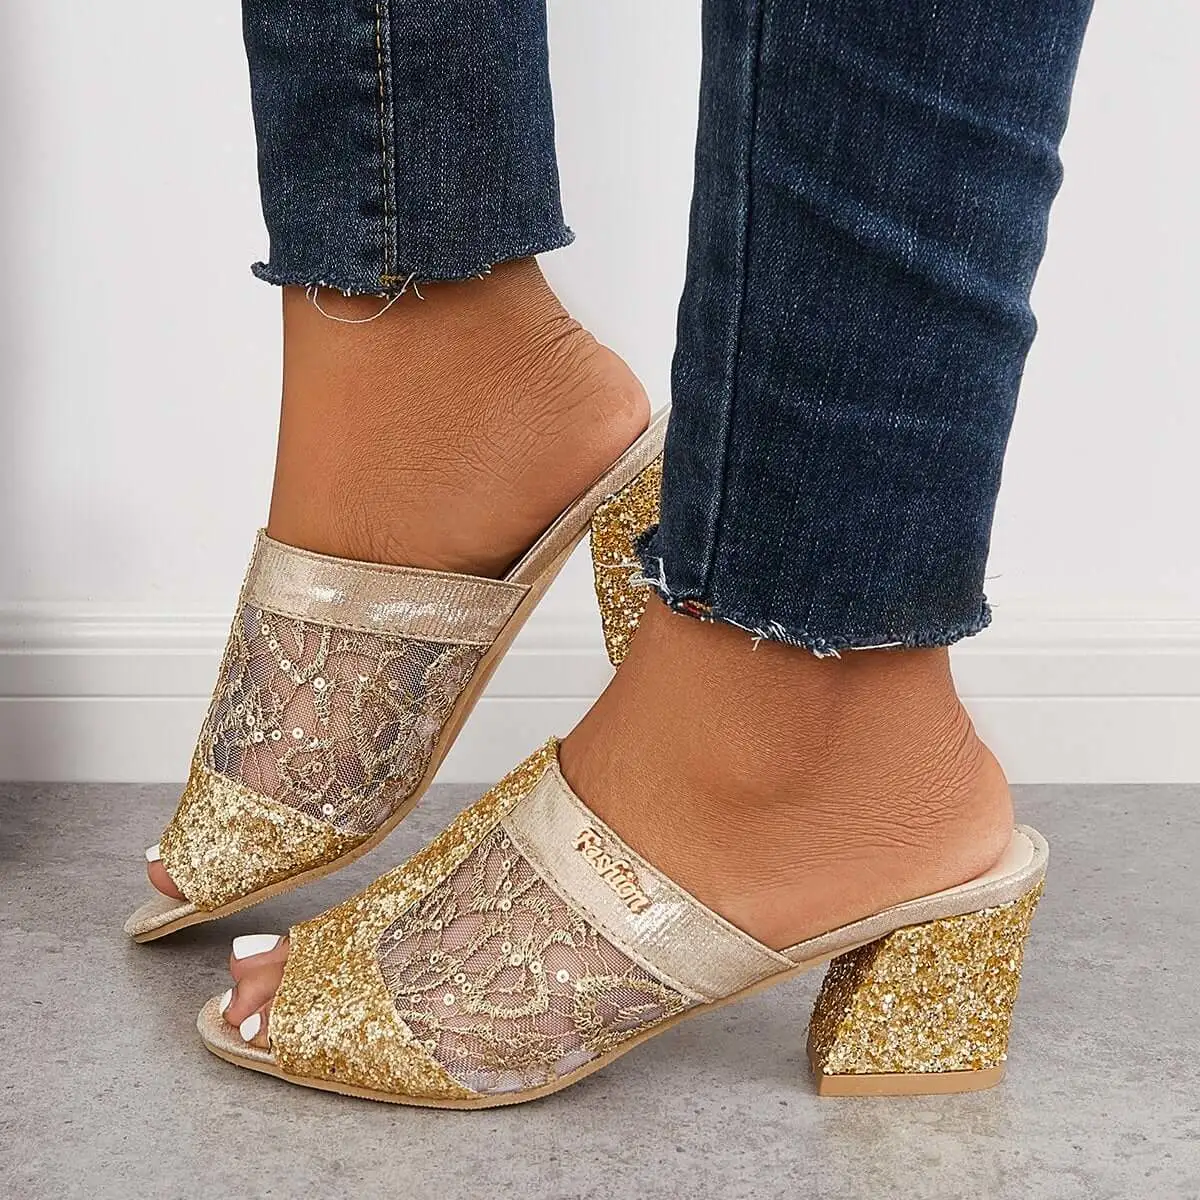 Floral Embroidery Backless Mules Slip on Block Heel Sandals